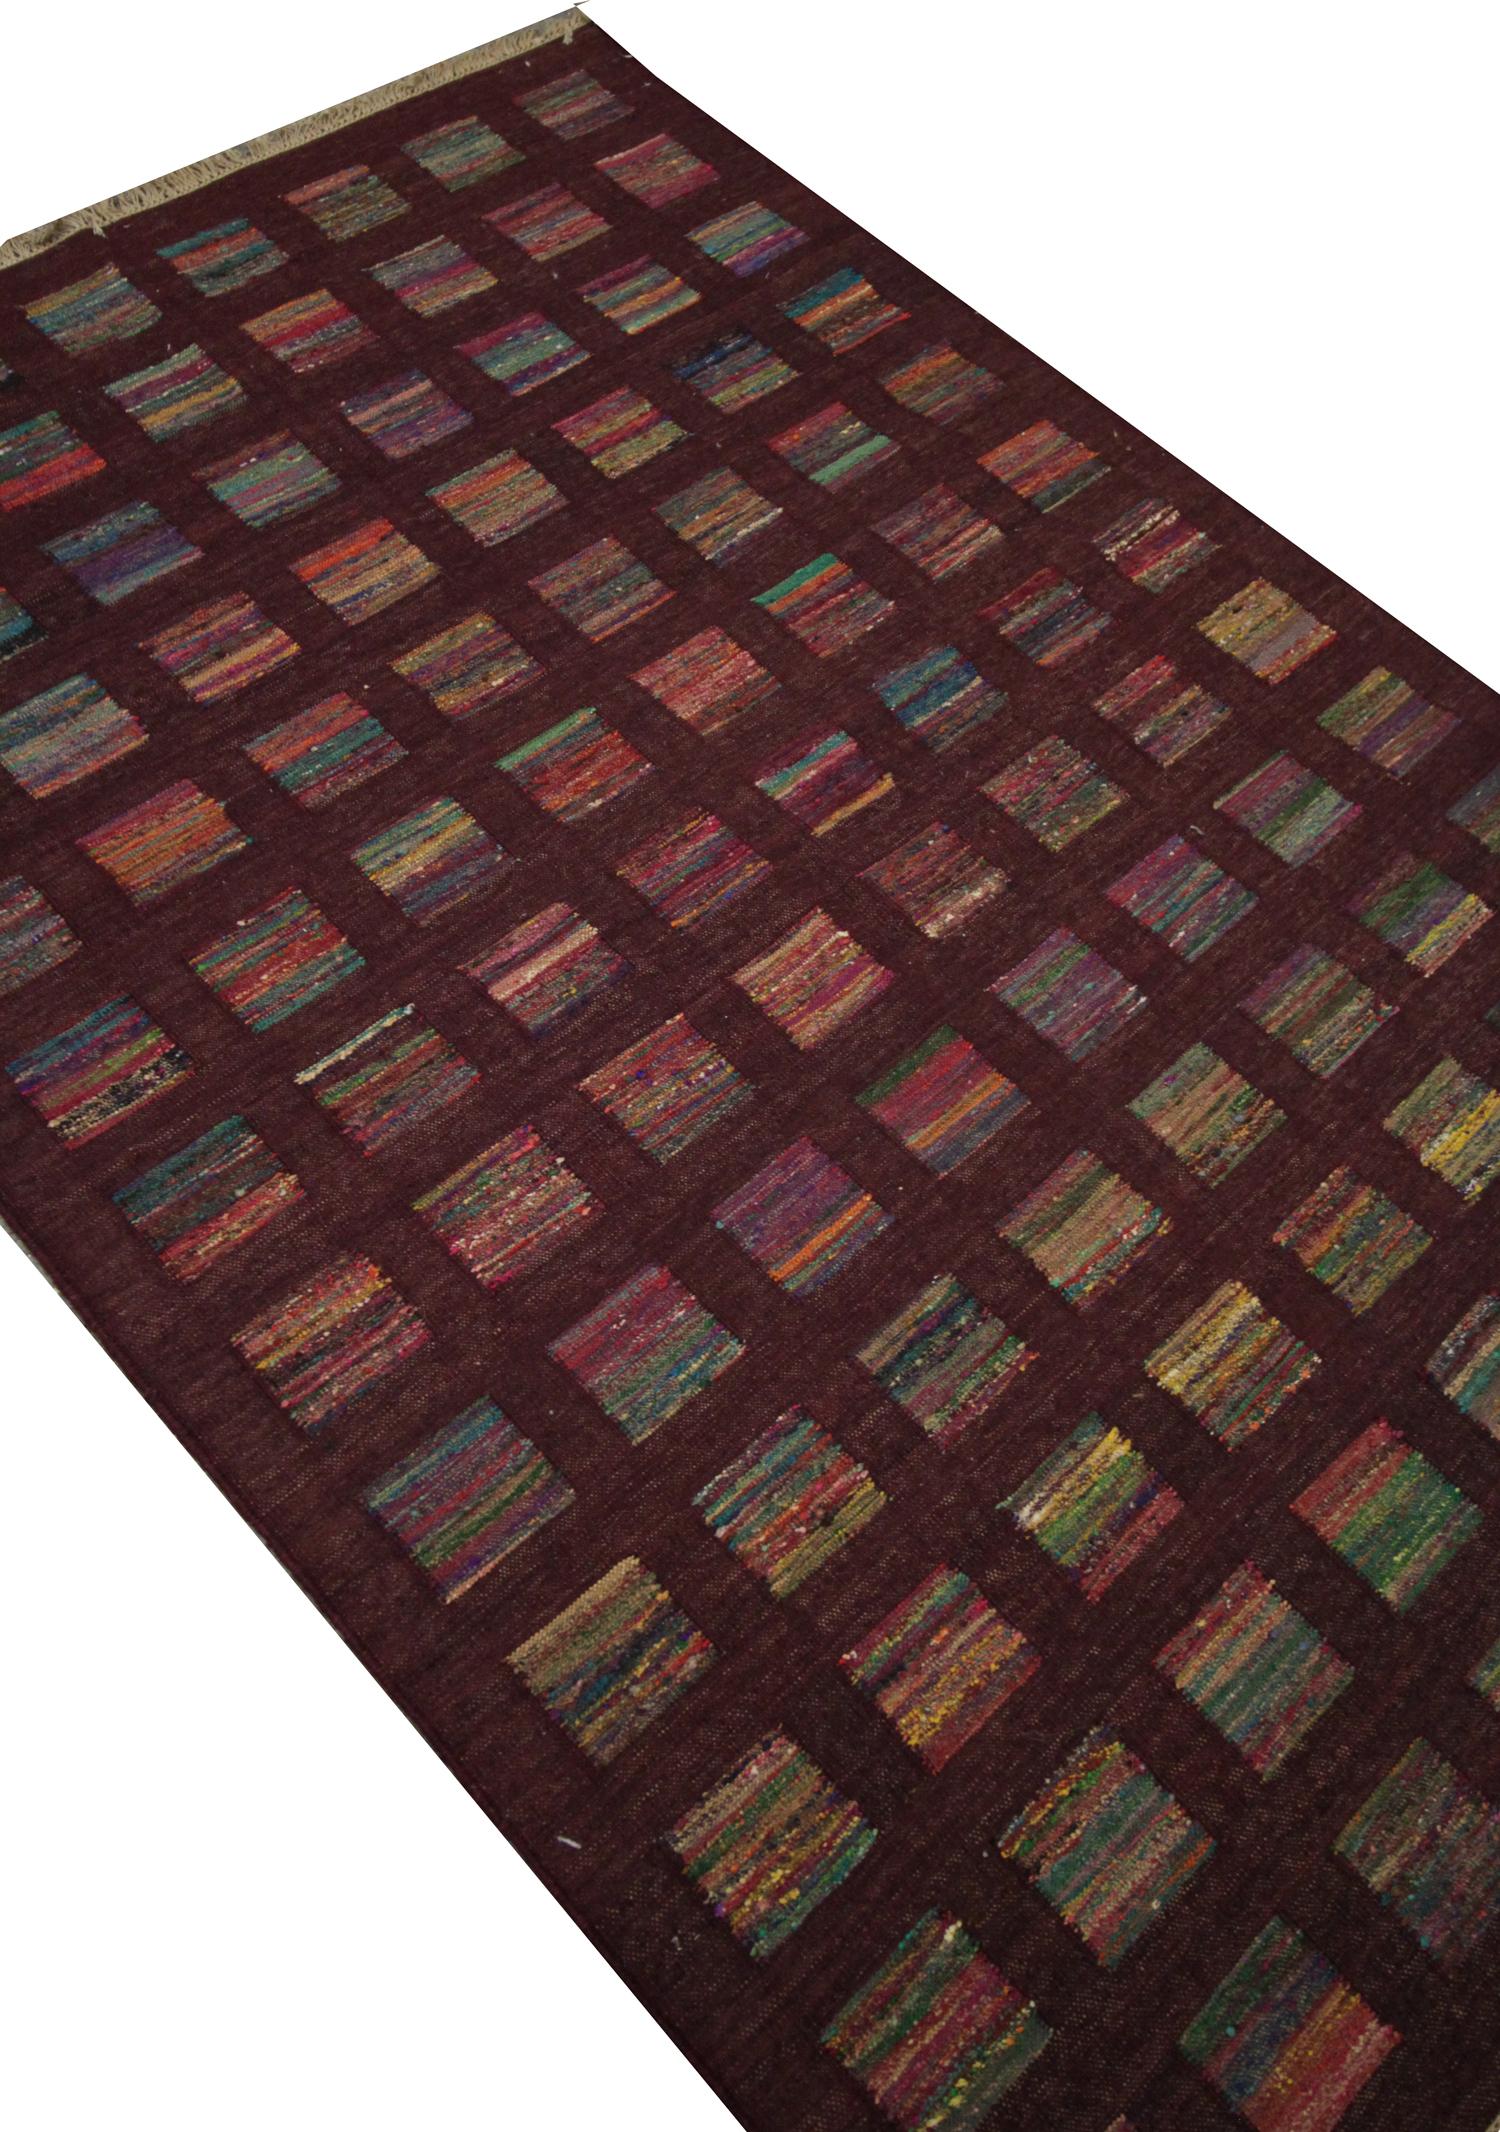 This piece is an excellent example of modern Kilims woven by hand in India. This piece was constructed in the early 2000s and is in excellent condition, having never been used. The design features a burgundy background with a grid of squares that